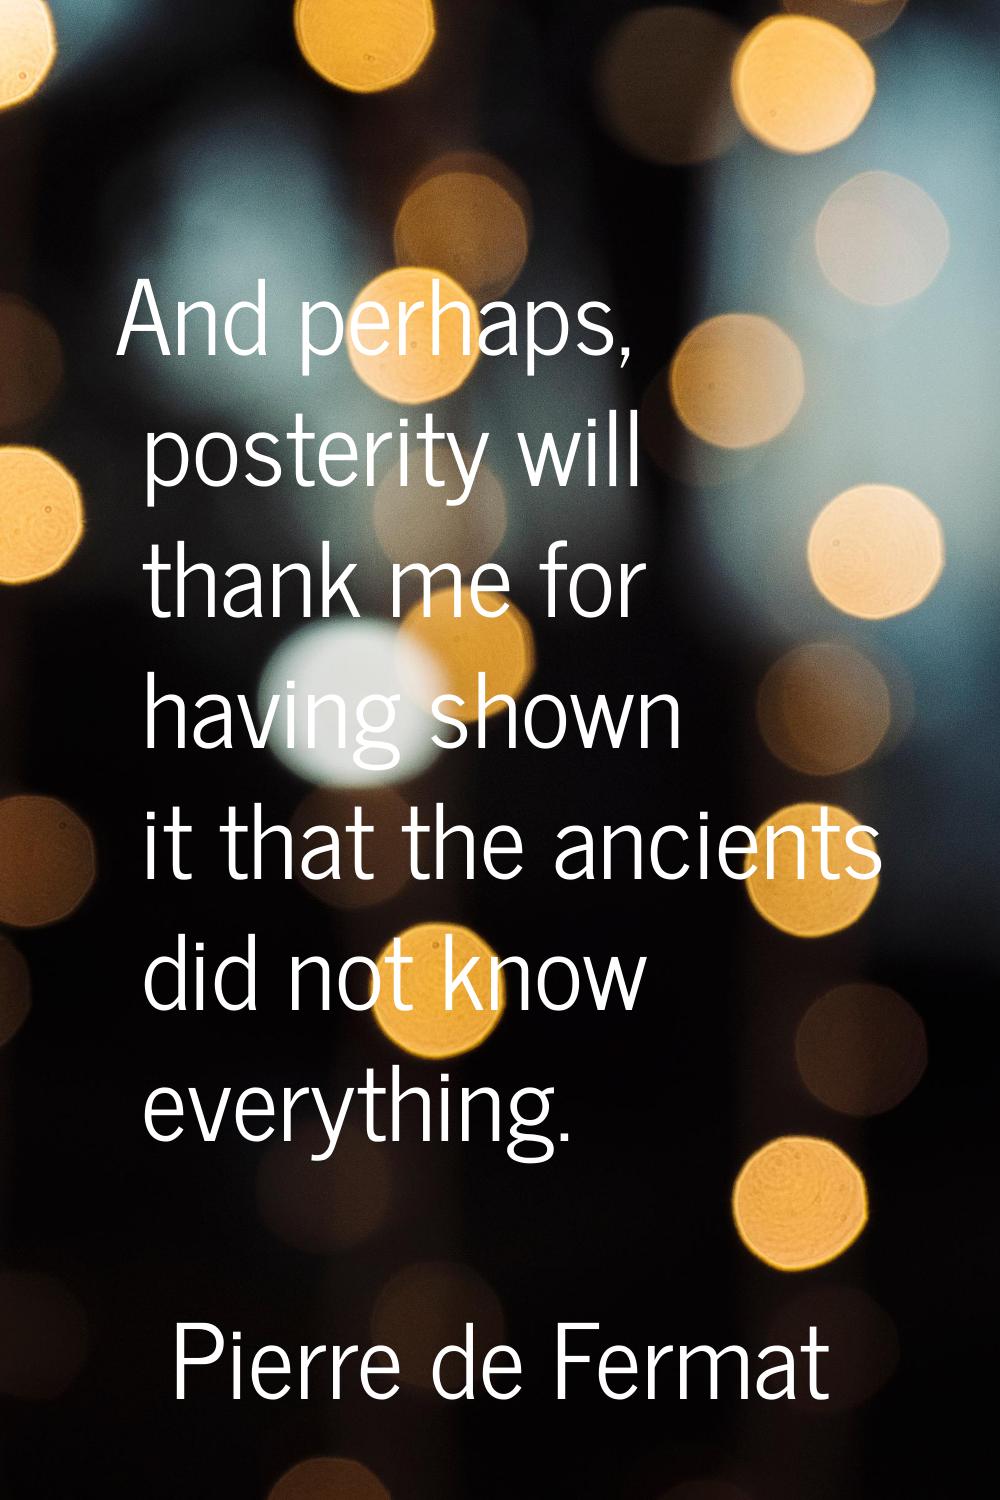 And perhaps, posterity will thank me for having shown it that the ancients did not know everything.